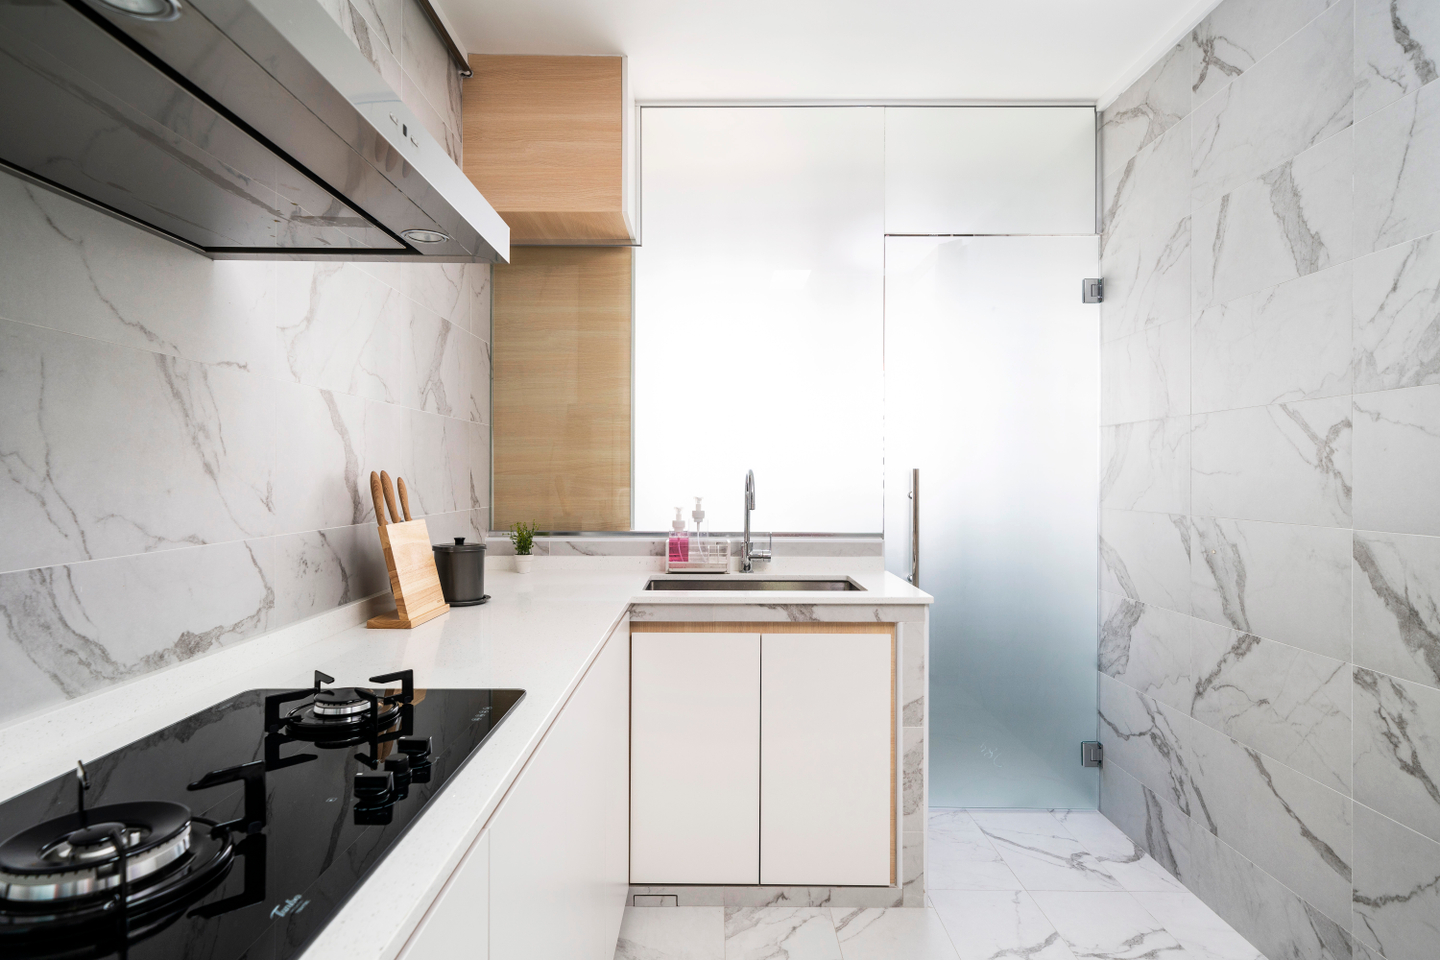 Minimalist Interior Design For Kitchens With Marble Dado Tiles